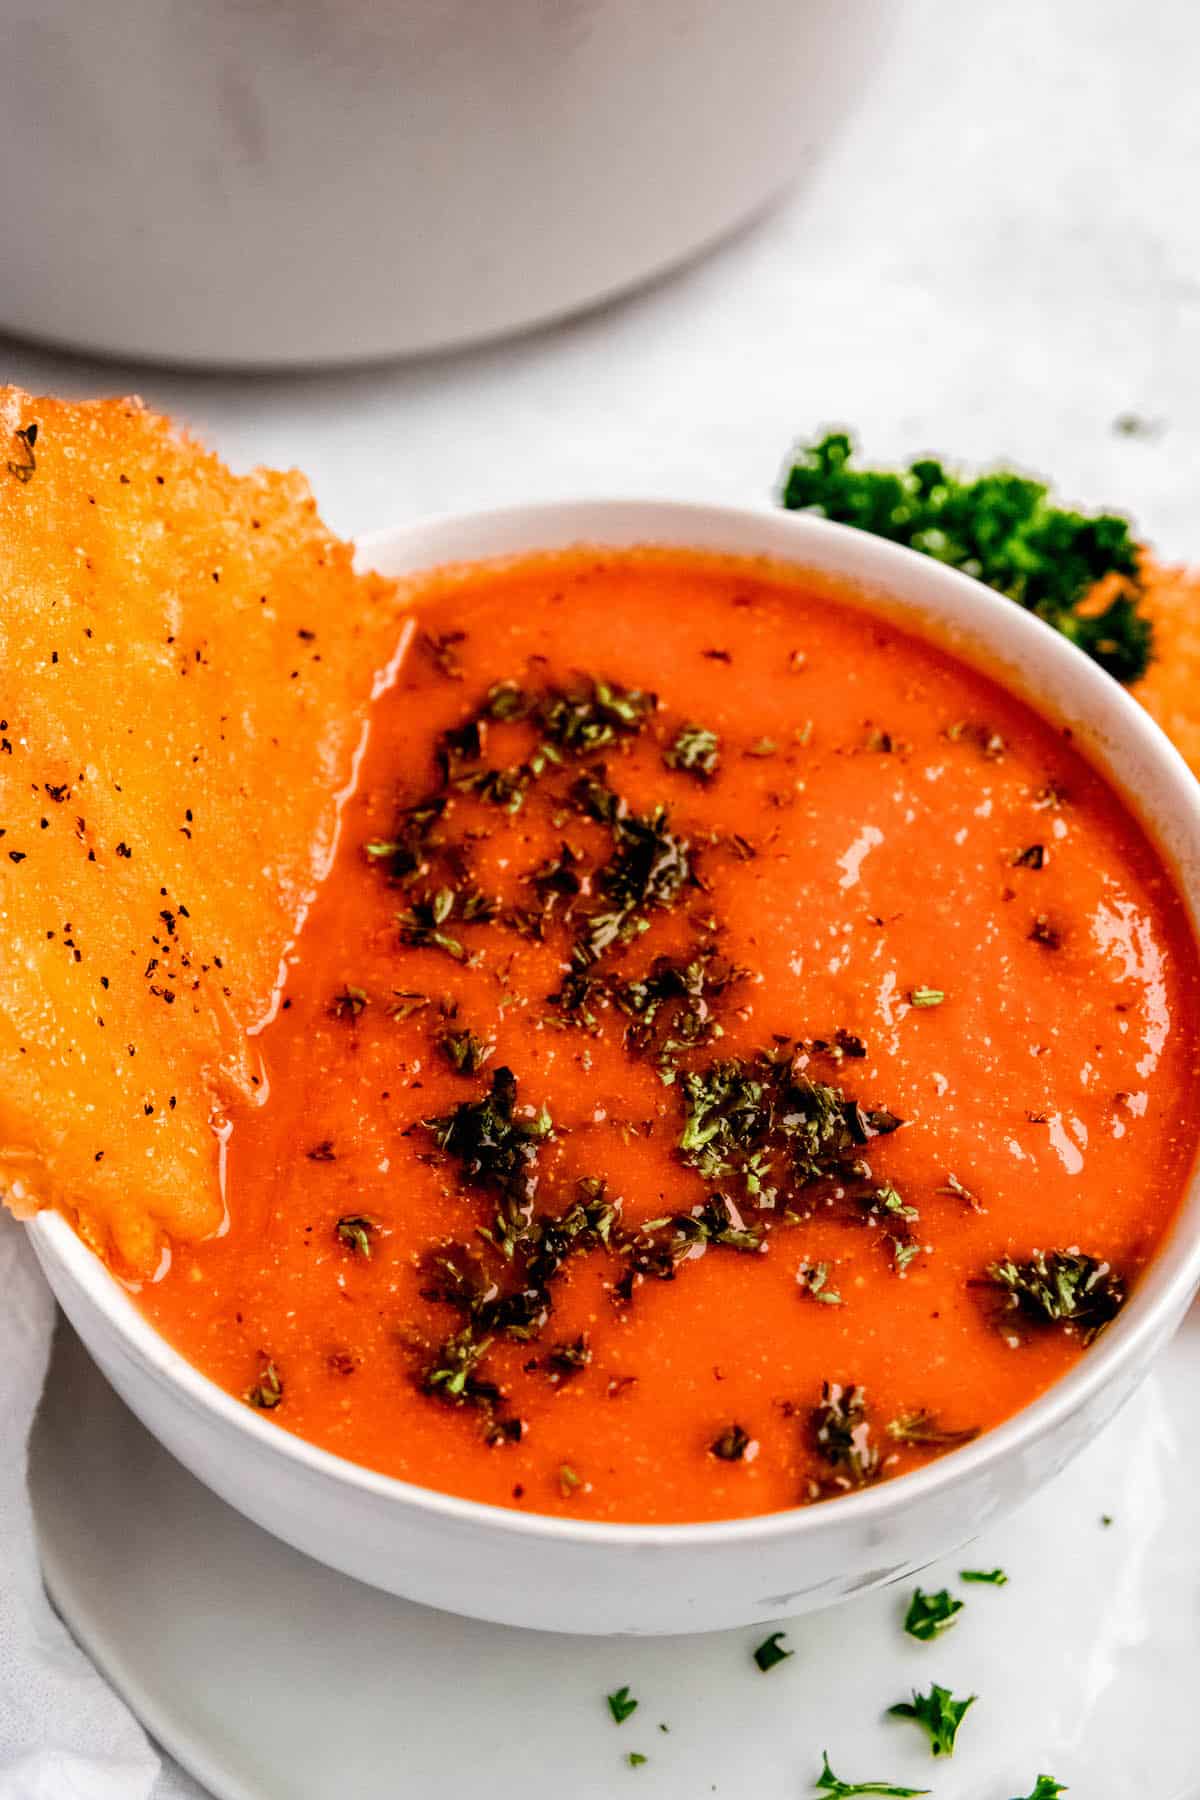 45 degree angle of a bowl of roasted red pepper soup with gouda cheese crisp dunked in the side and chopped parsley as a garnish.